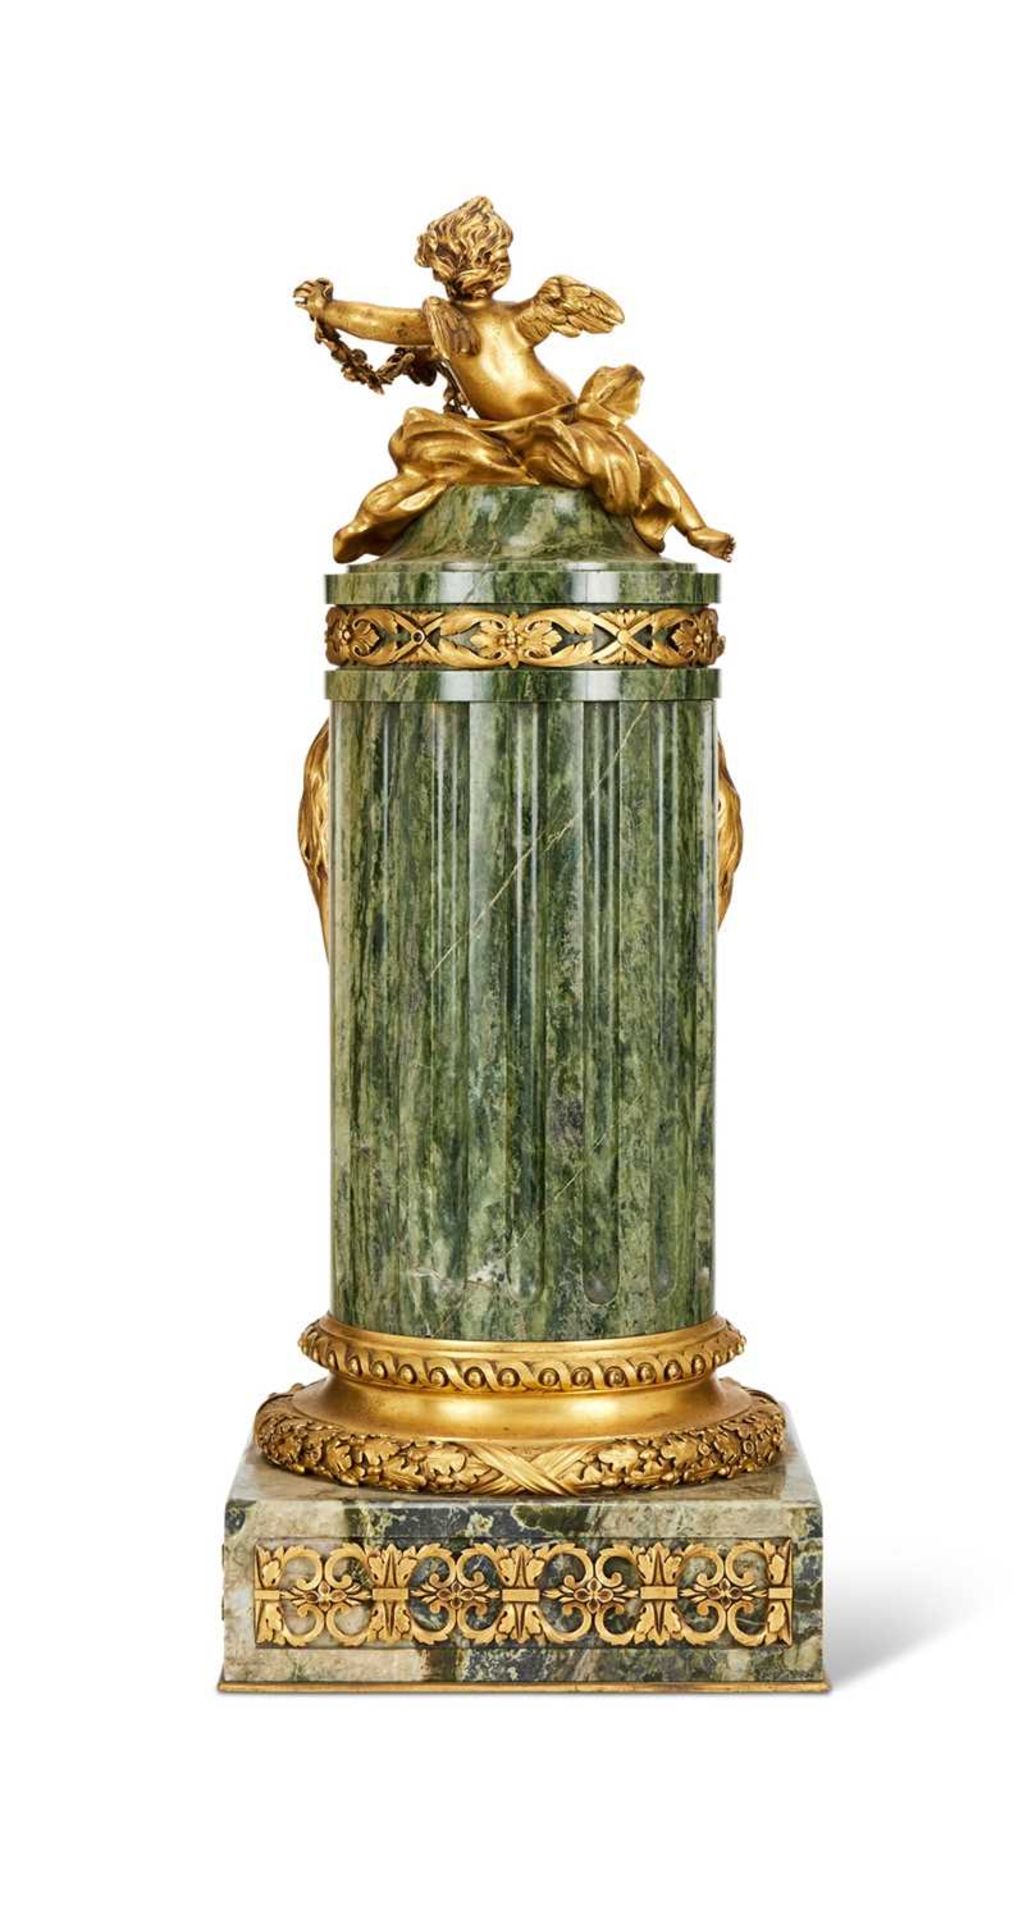 SORMANI, PARIS: AN IMPORTANT LATE 19TH CENTURY ORMOLU AND MARBLE MANTEL CLOCK - Image 4 of 5